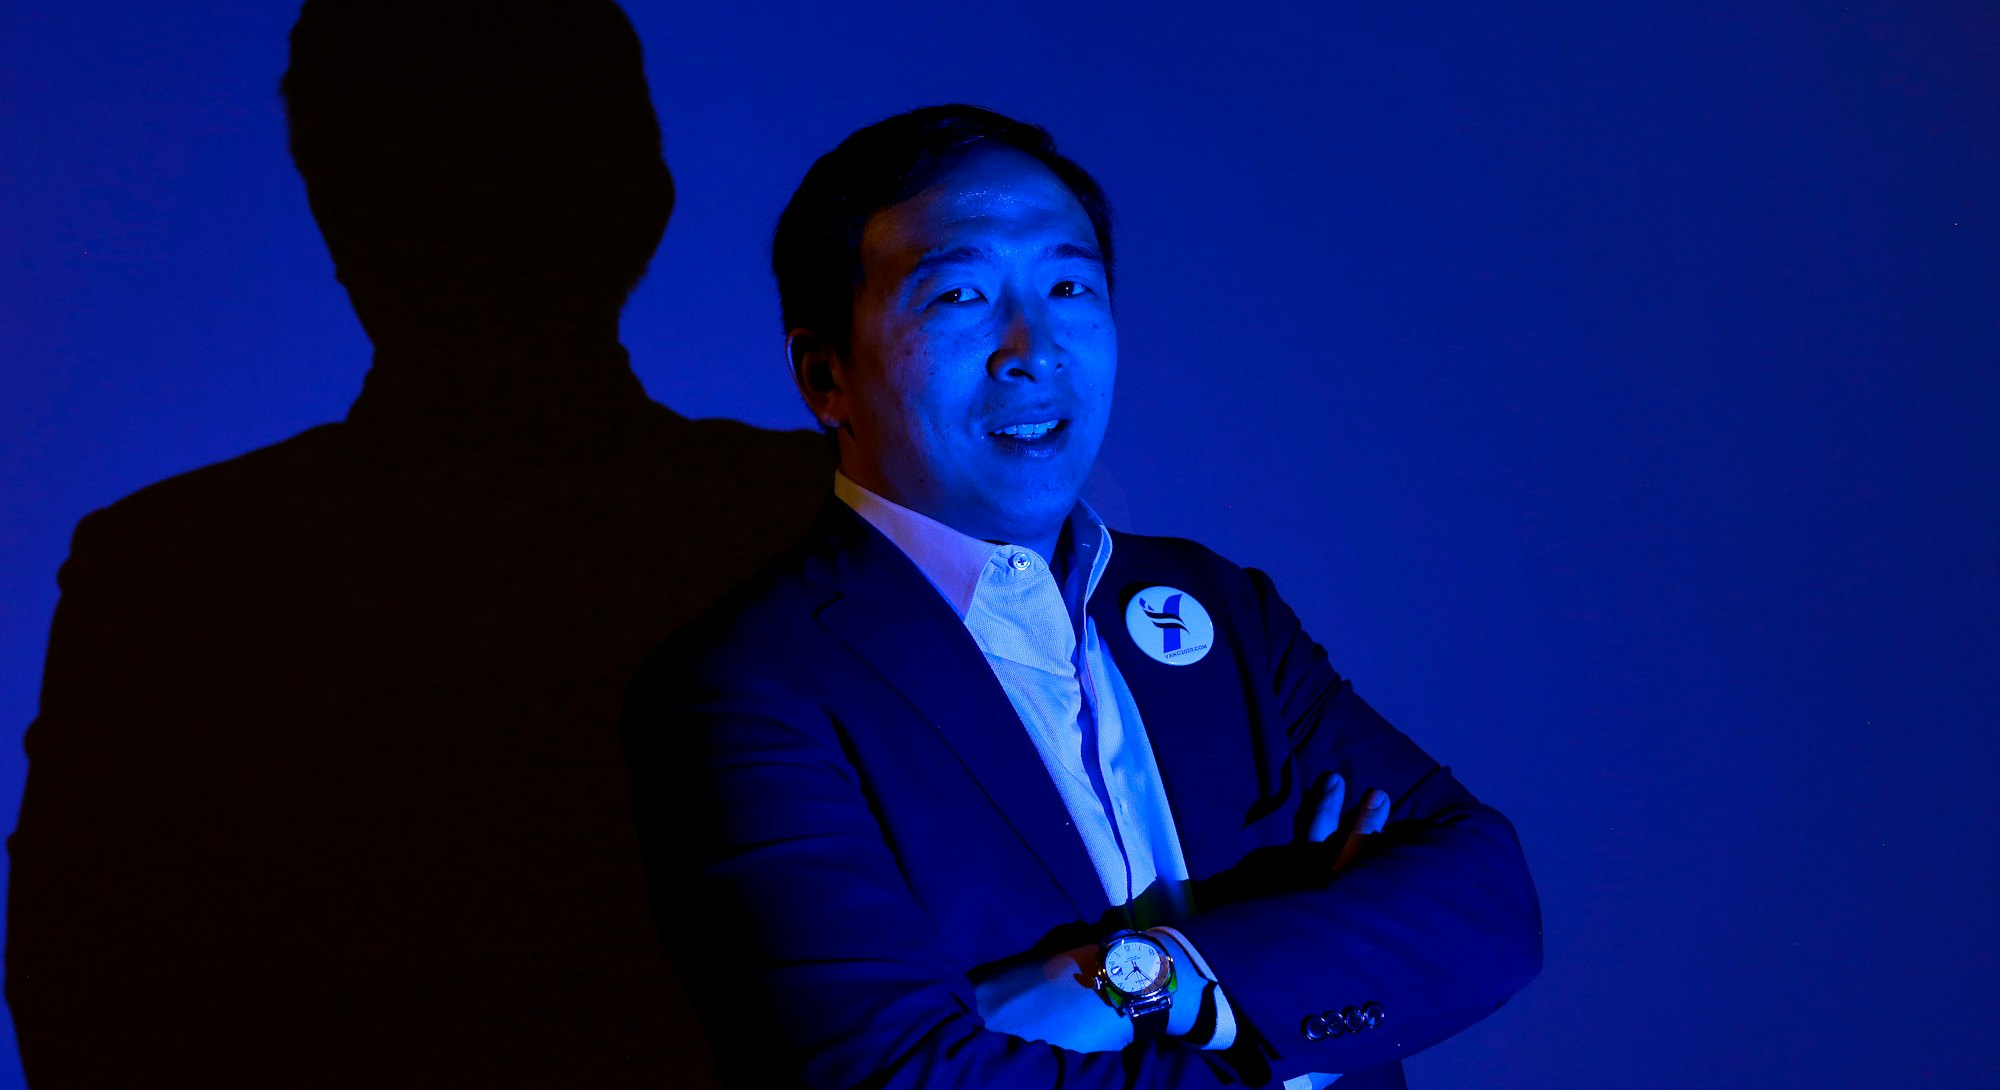 STUART, IOWA - APRIL 27: Democratic presidential candidate Andrew Yang poses for a portrait after sp...